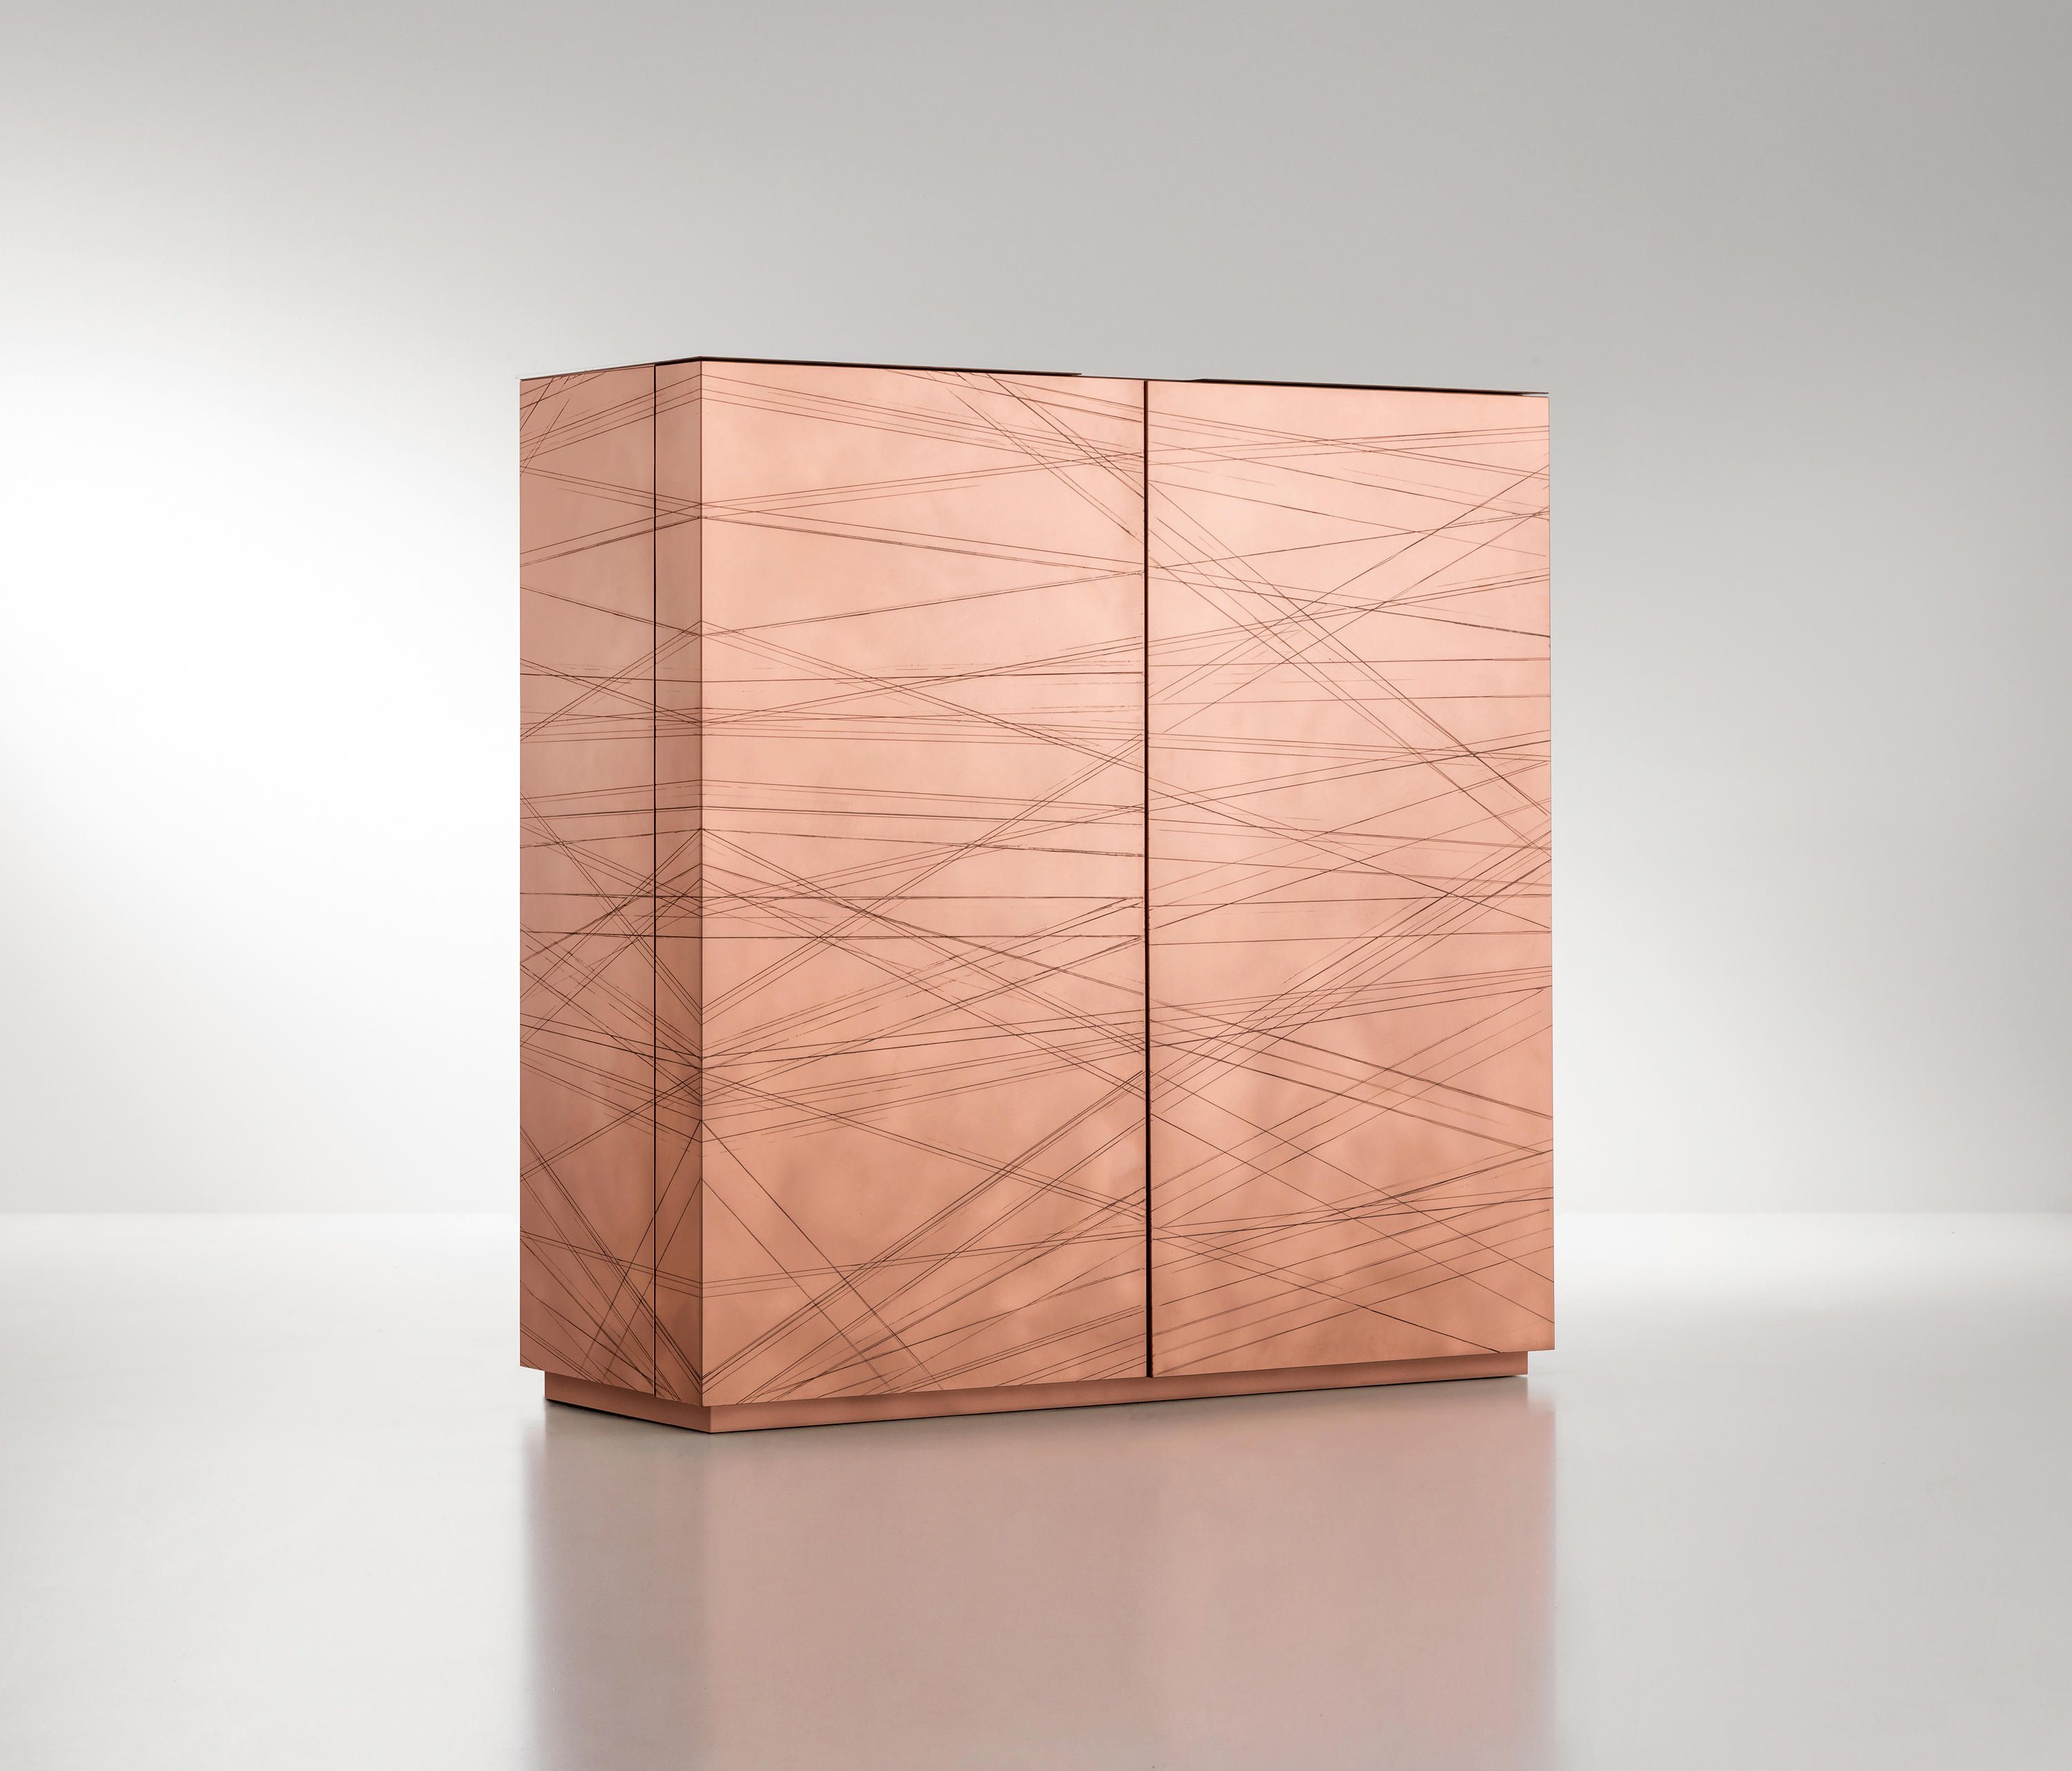 Graffio – Sideboards / Kommoden Von De Castelli | Architonic Pertaining To Castelli Sideboards (View 4 of 30)